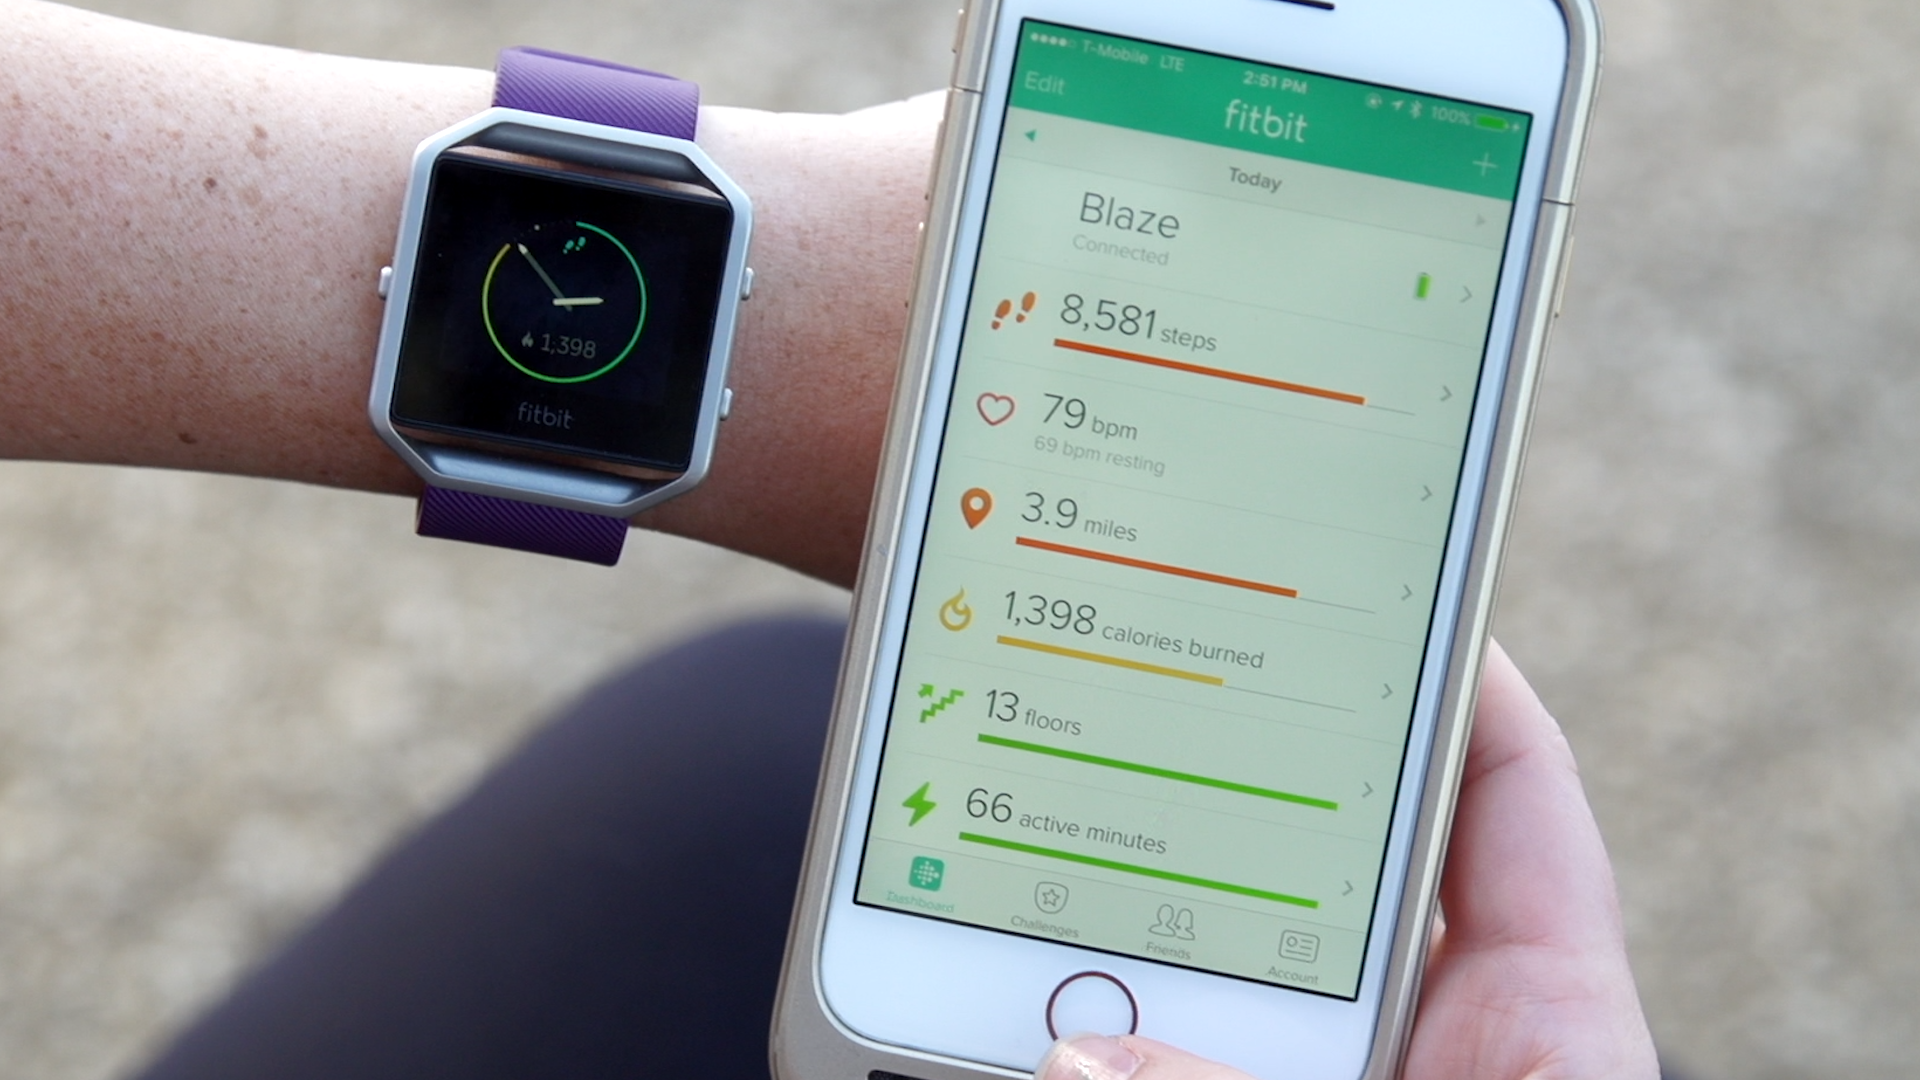 pair fitbit blaze with iphone